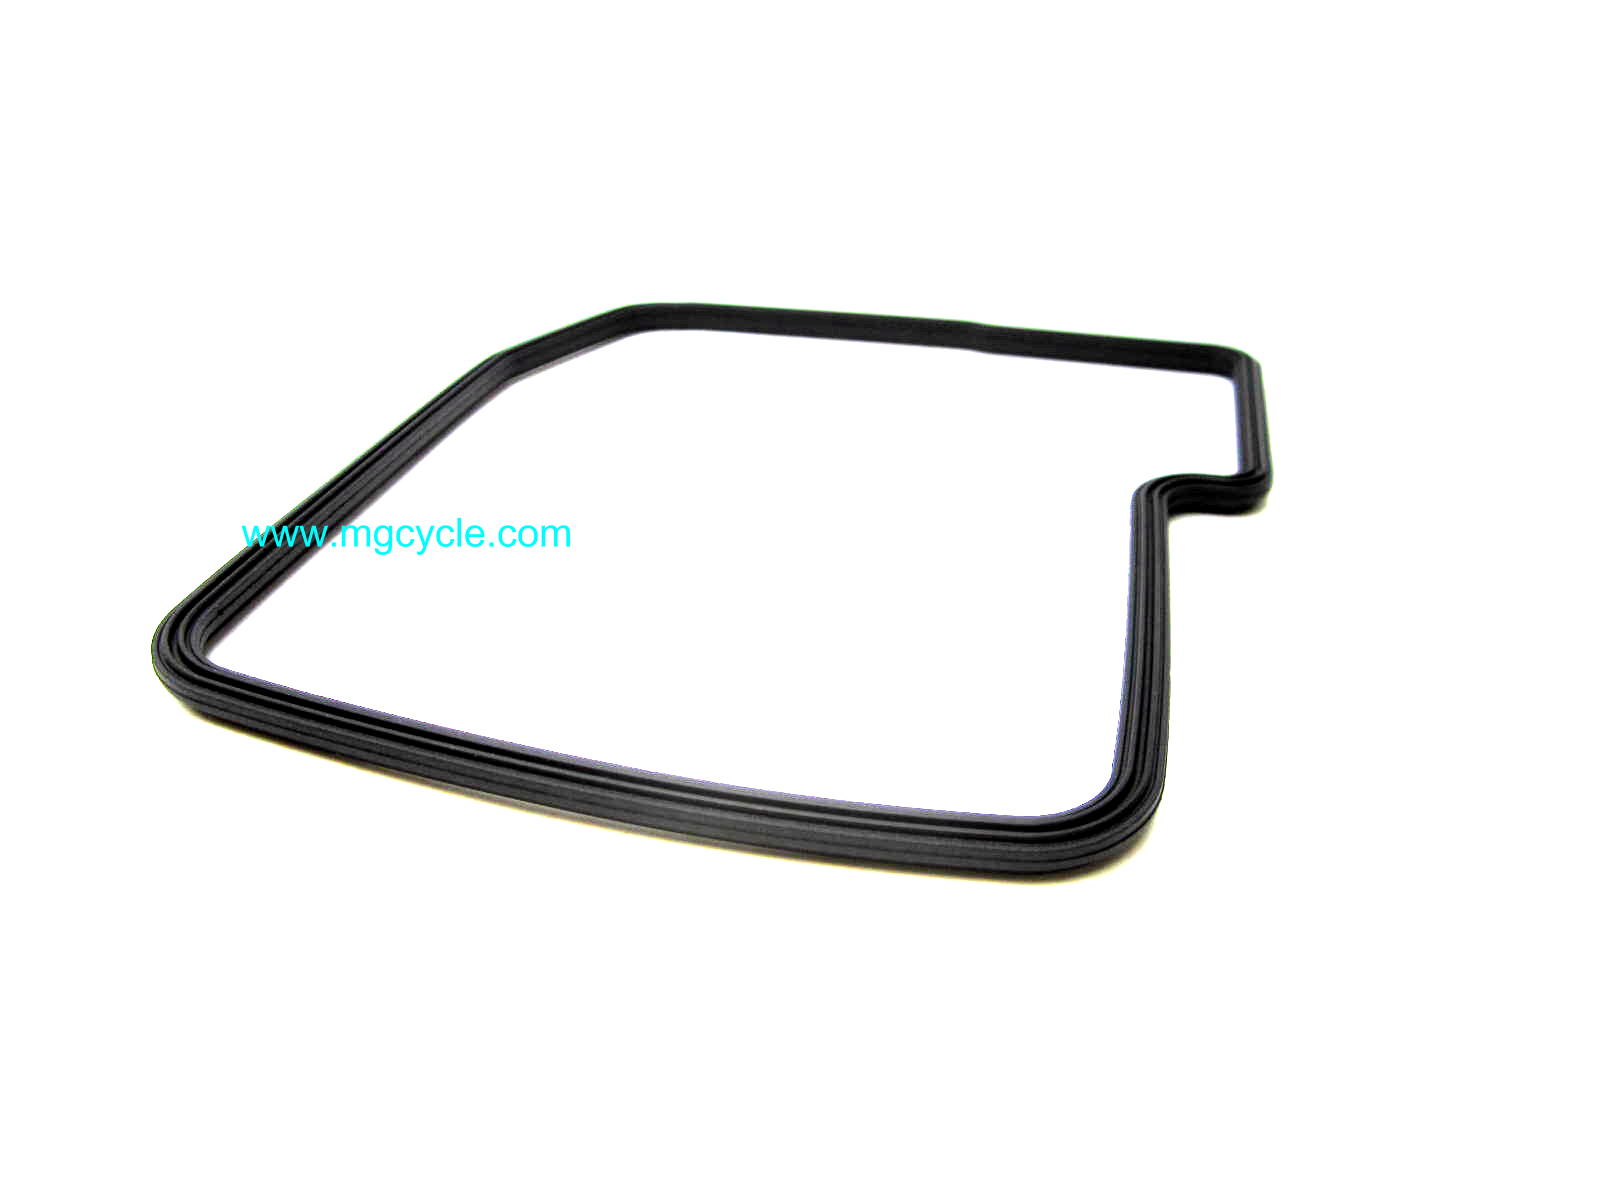 Right side valve cover gasket, 1200cc 8 valve, 1400s